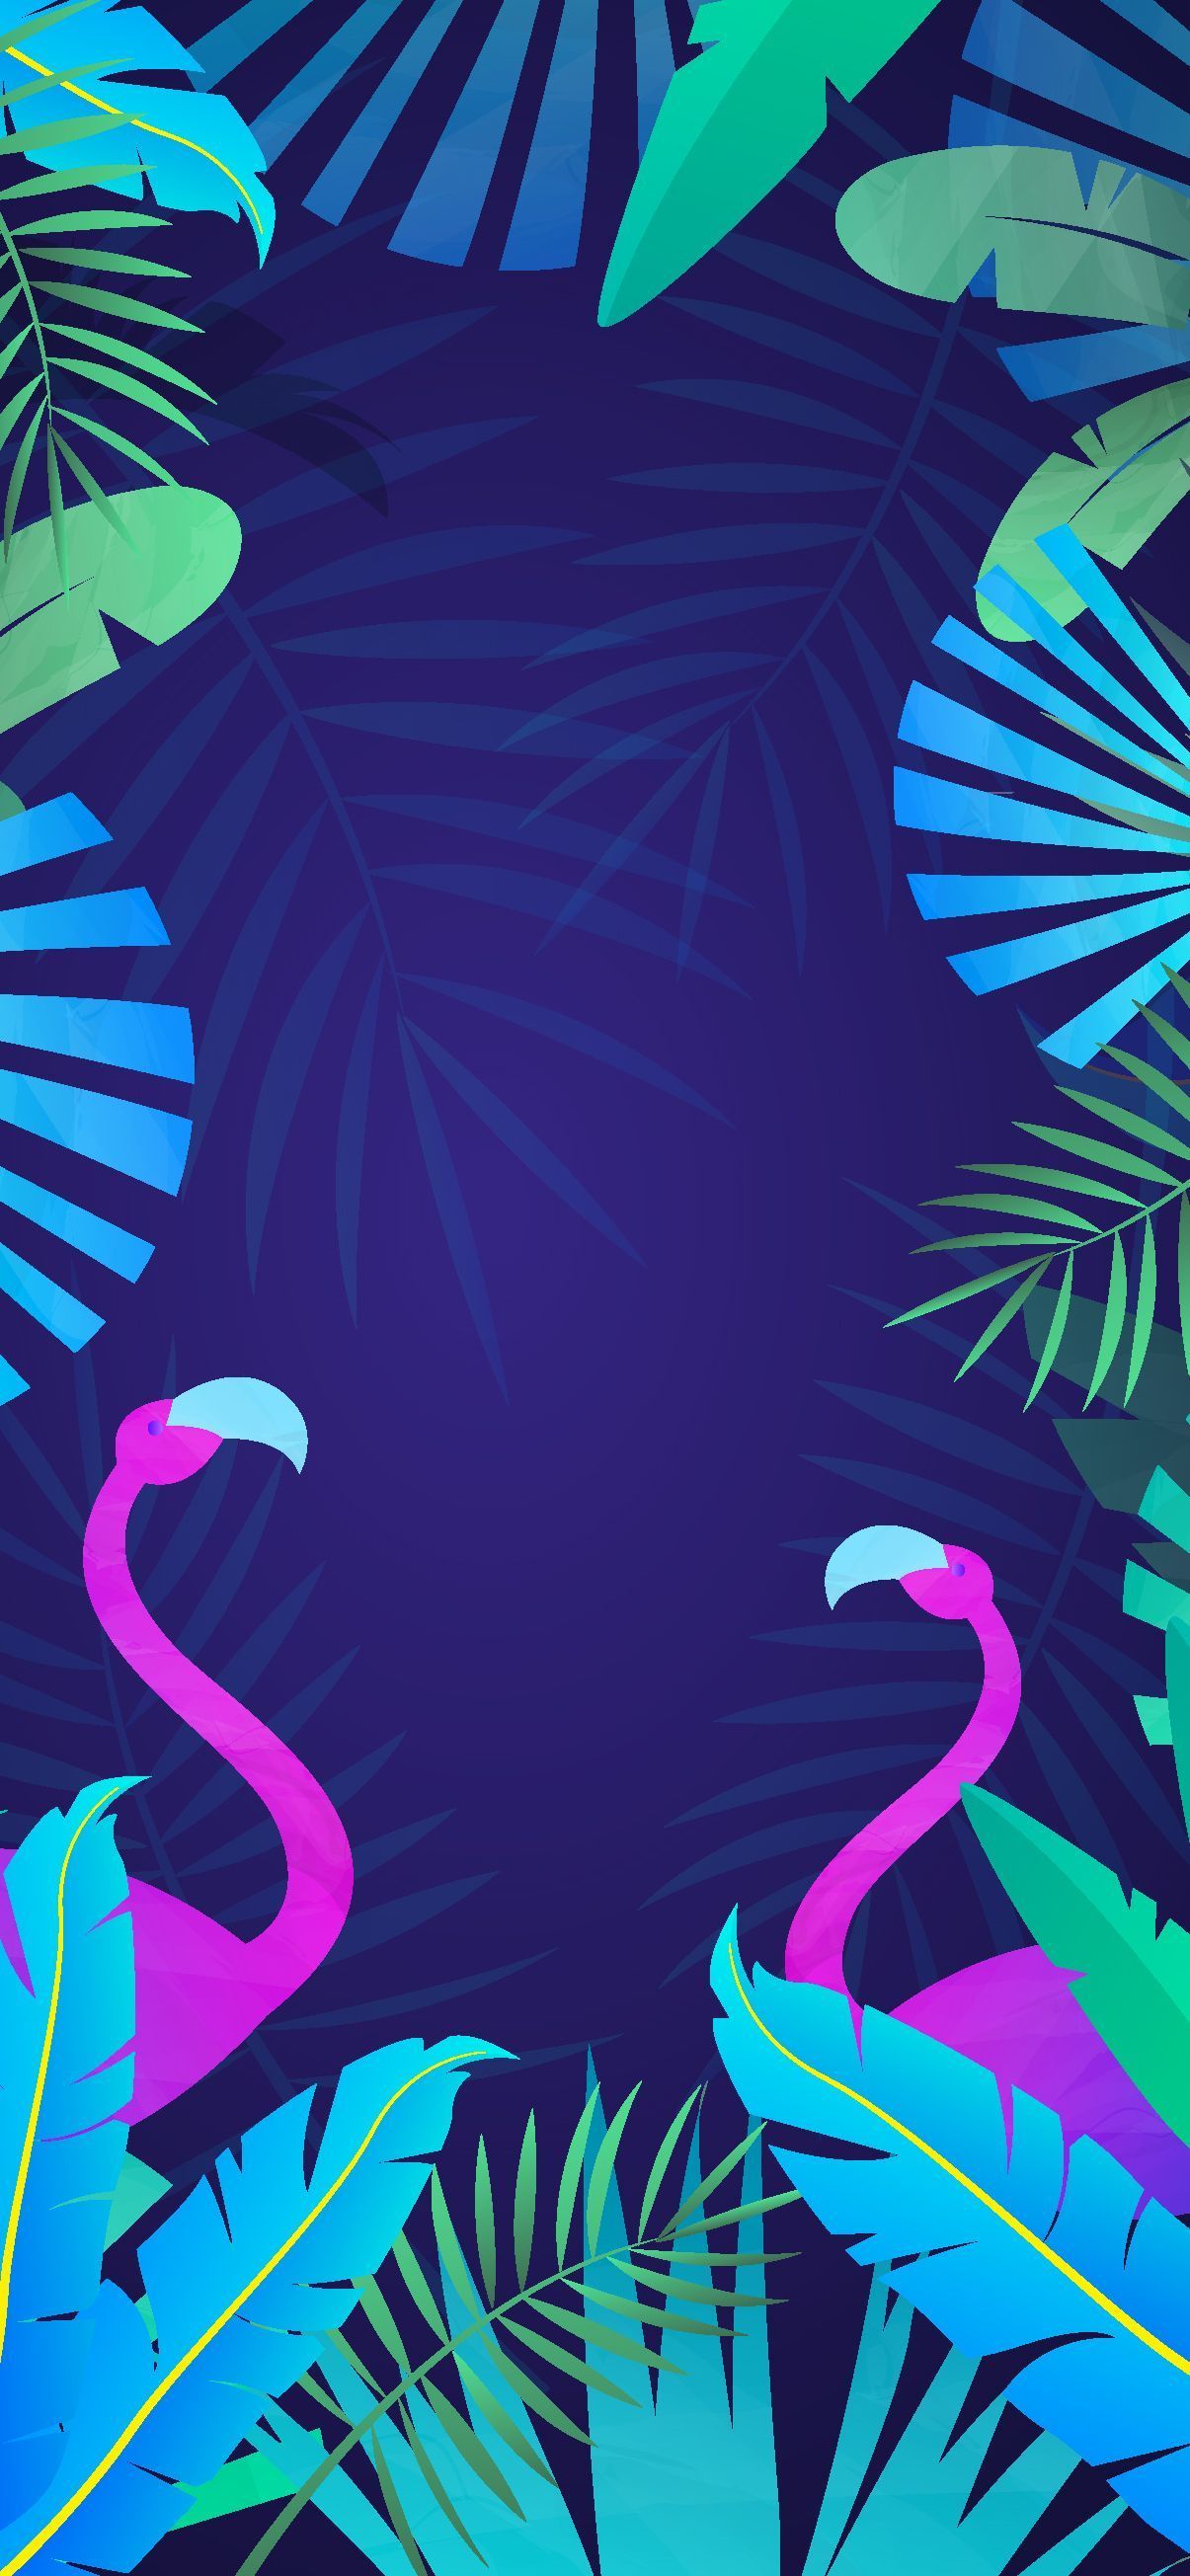 IPhone wallpaper with flamingos and tropical leaves. - Tropical, jungle, vector